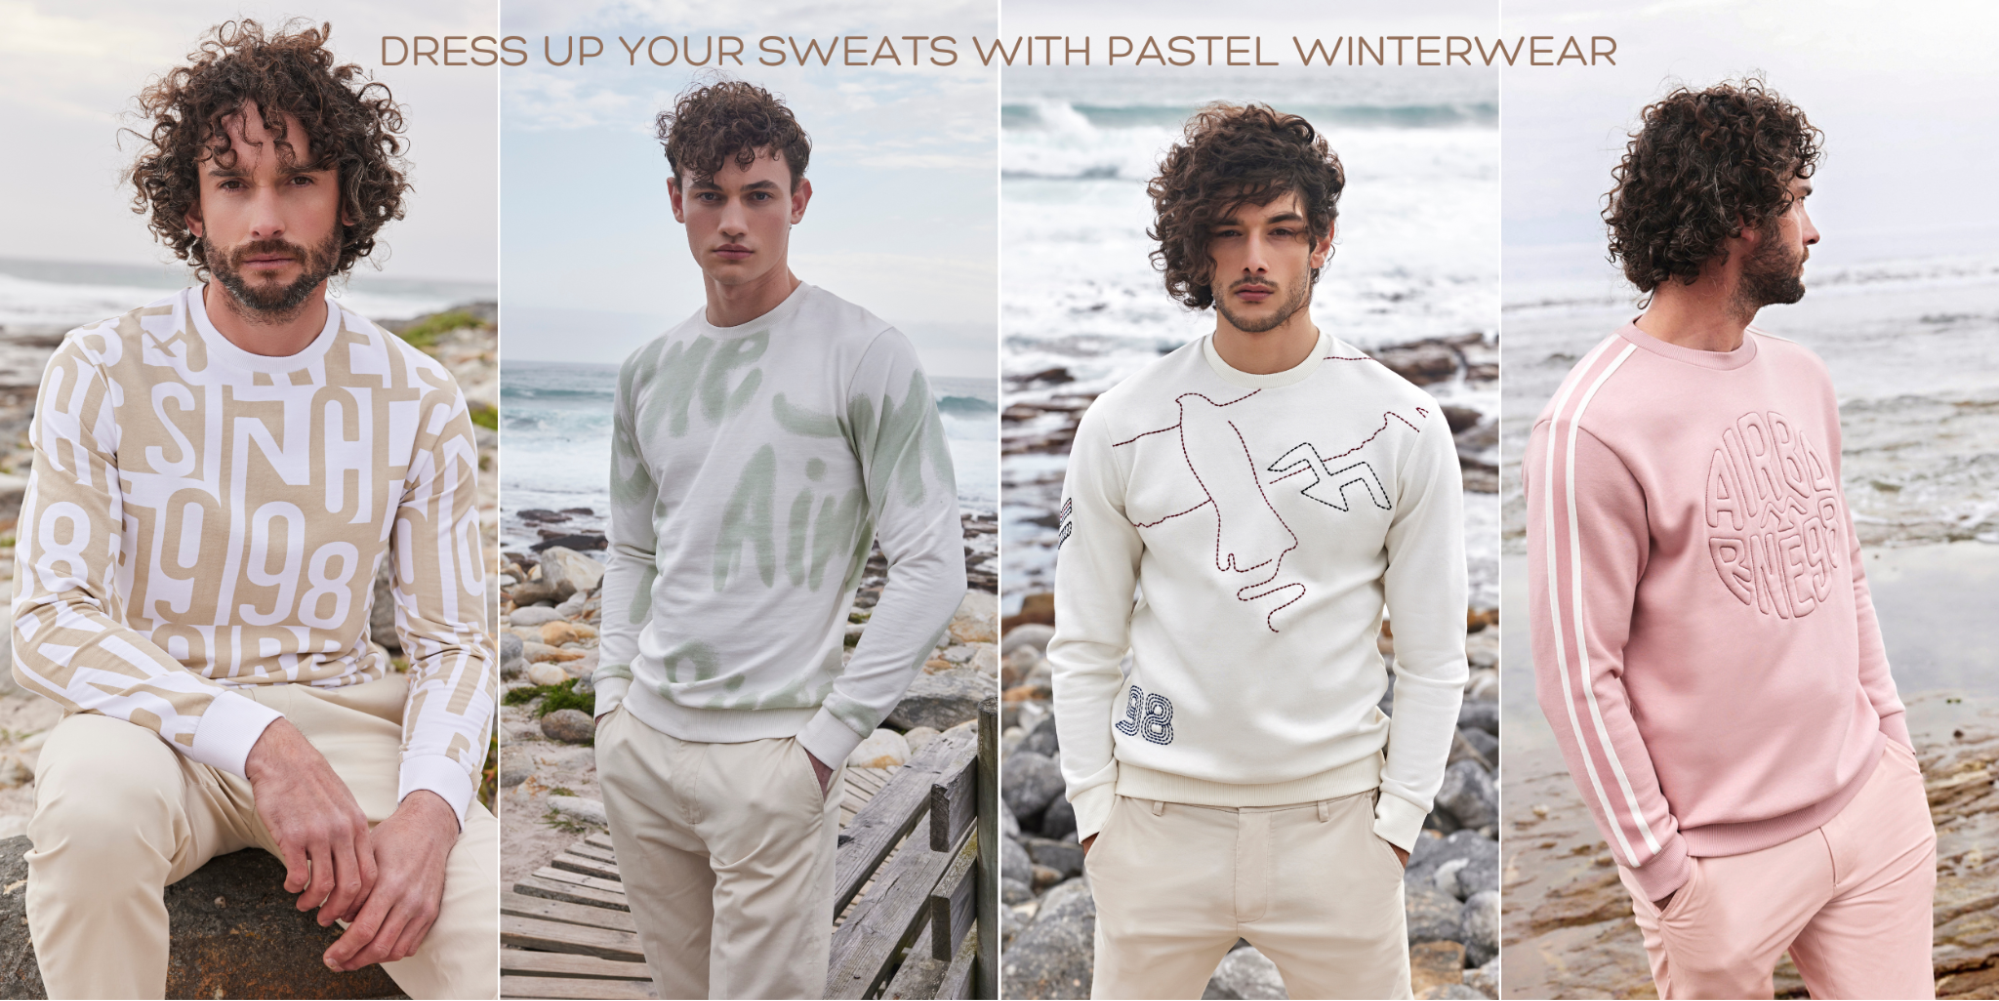 Dress up your sweats with Pastel Winterwear